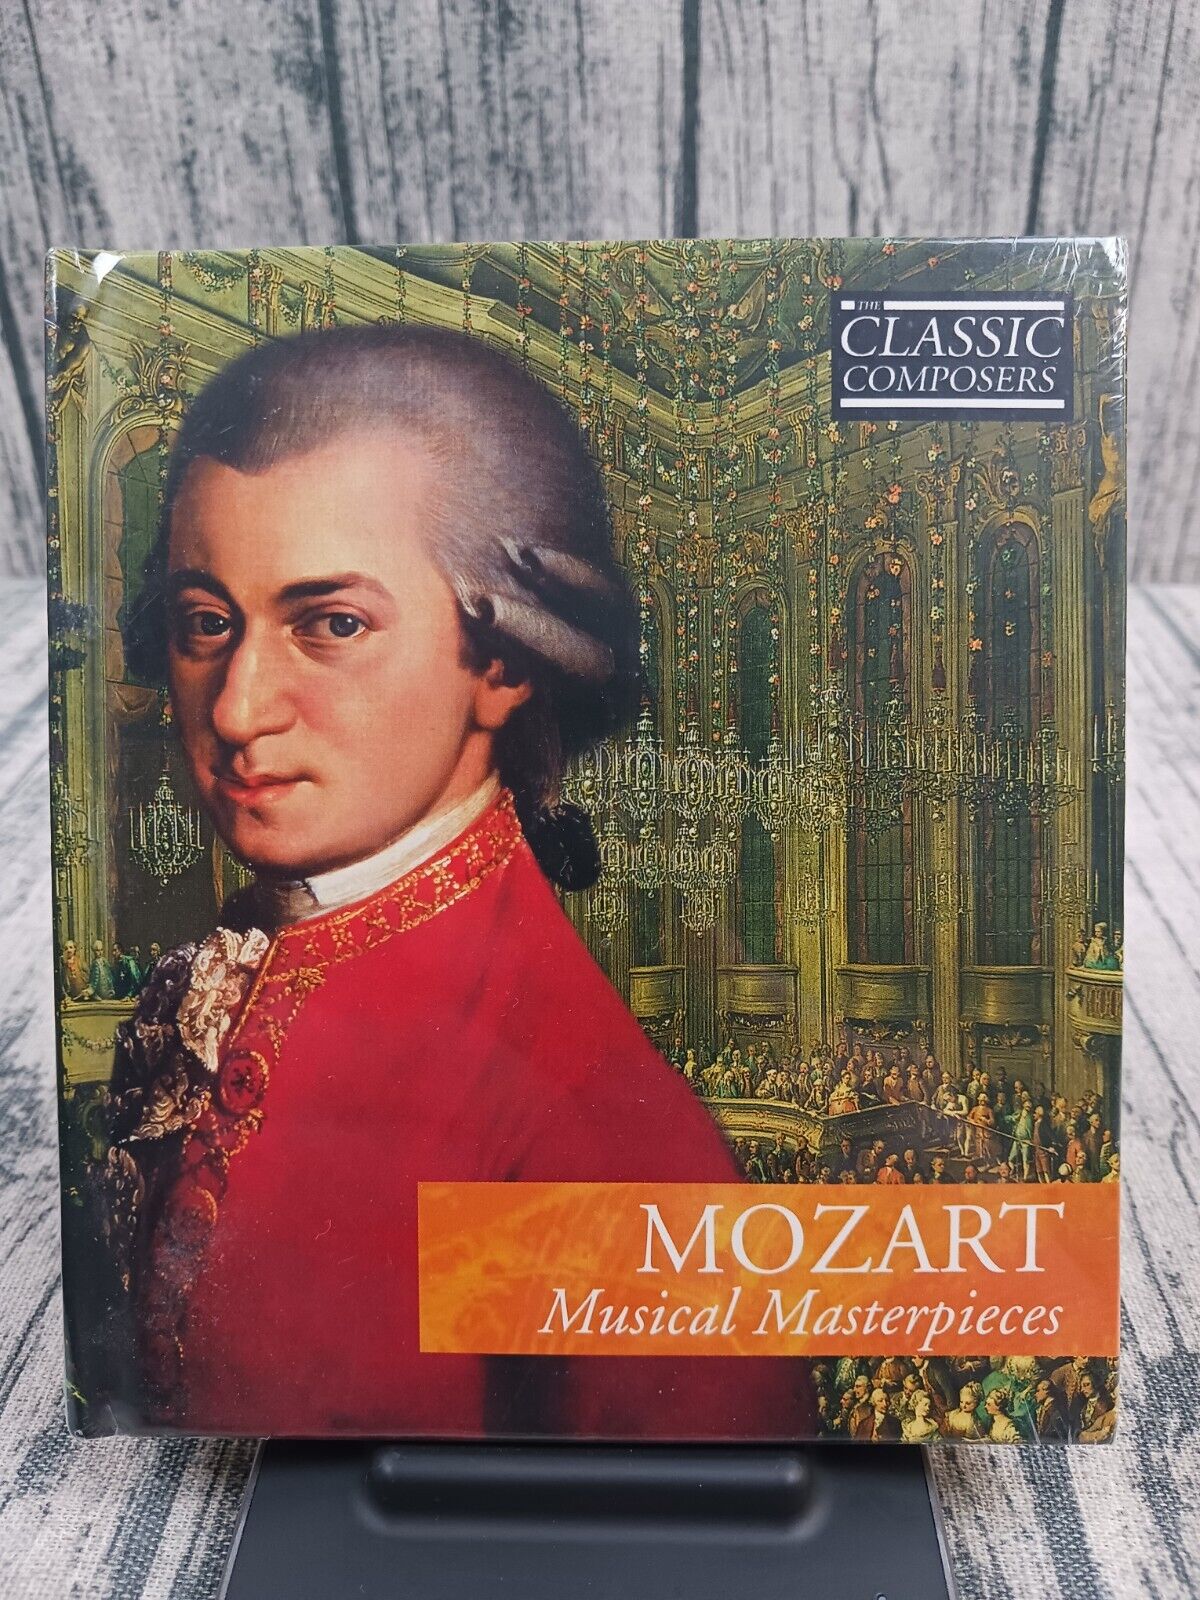 Mozart: Musical Masterpieces (CD, Volume 3, Classic Composers) Brand New 